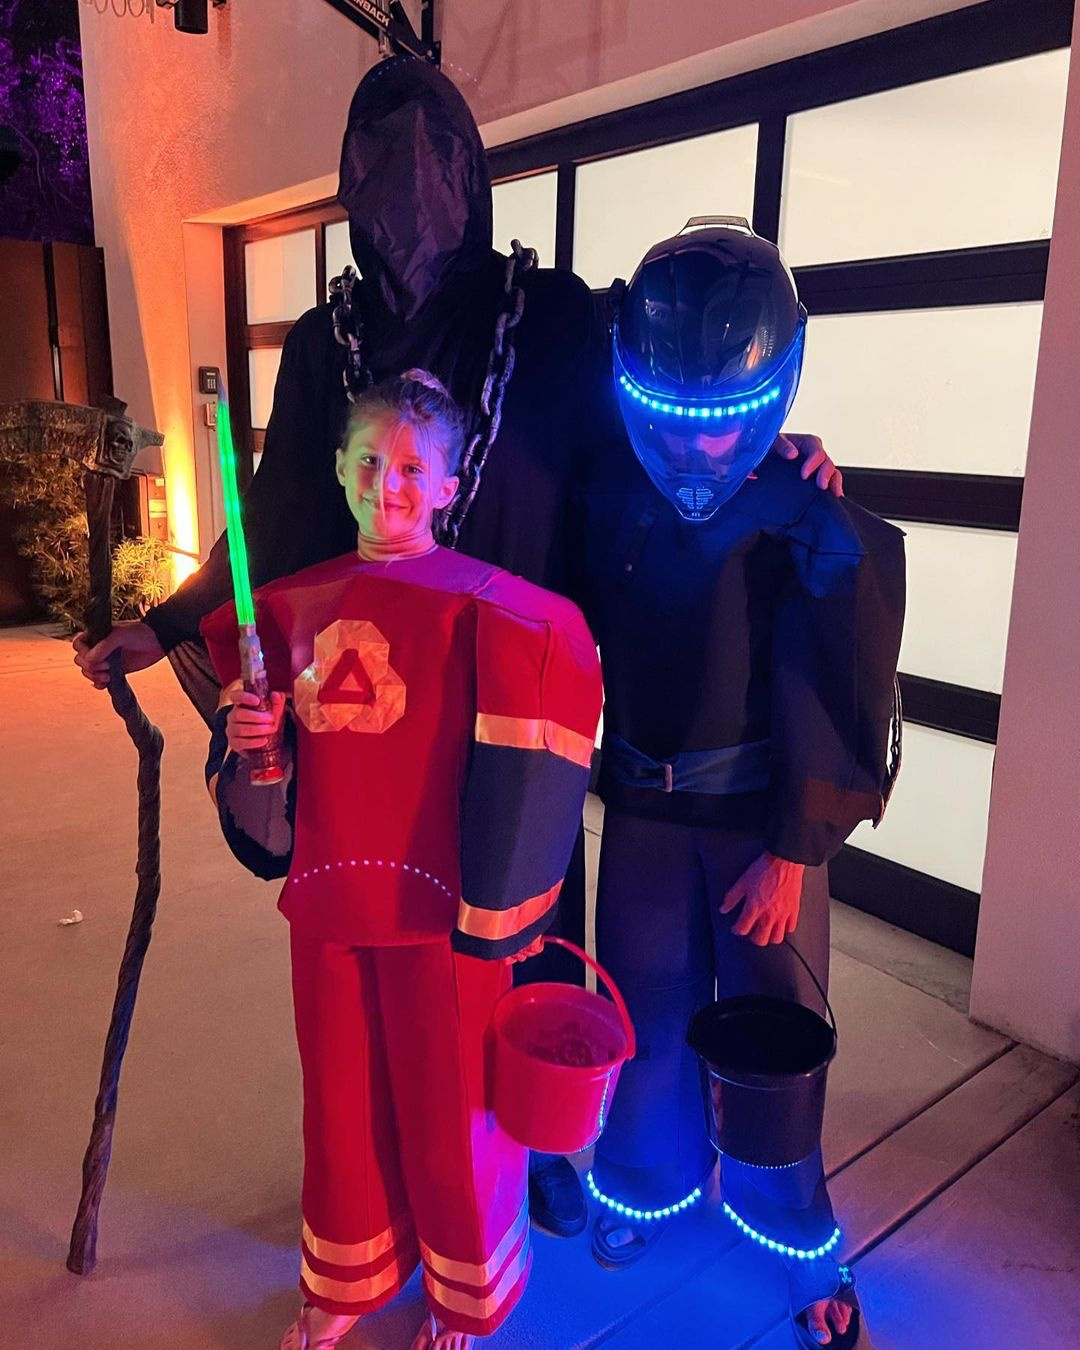 Elon Musk's BIG RED Halloween Costume gets VILIFIED! MUST SEE PHOTOS  (inside)